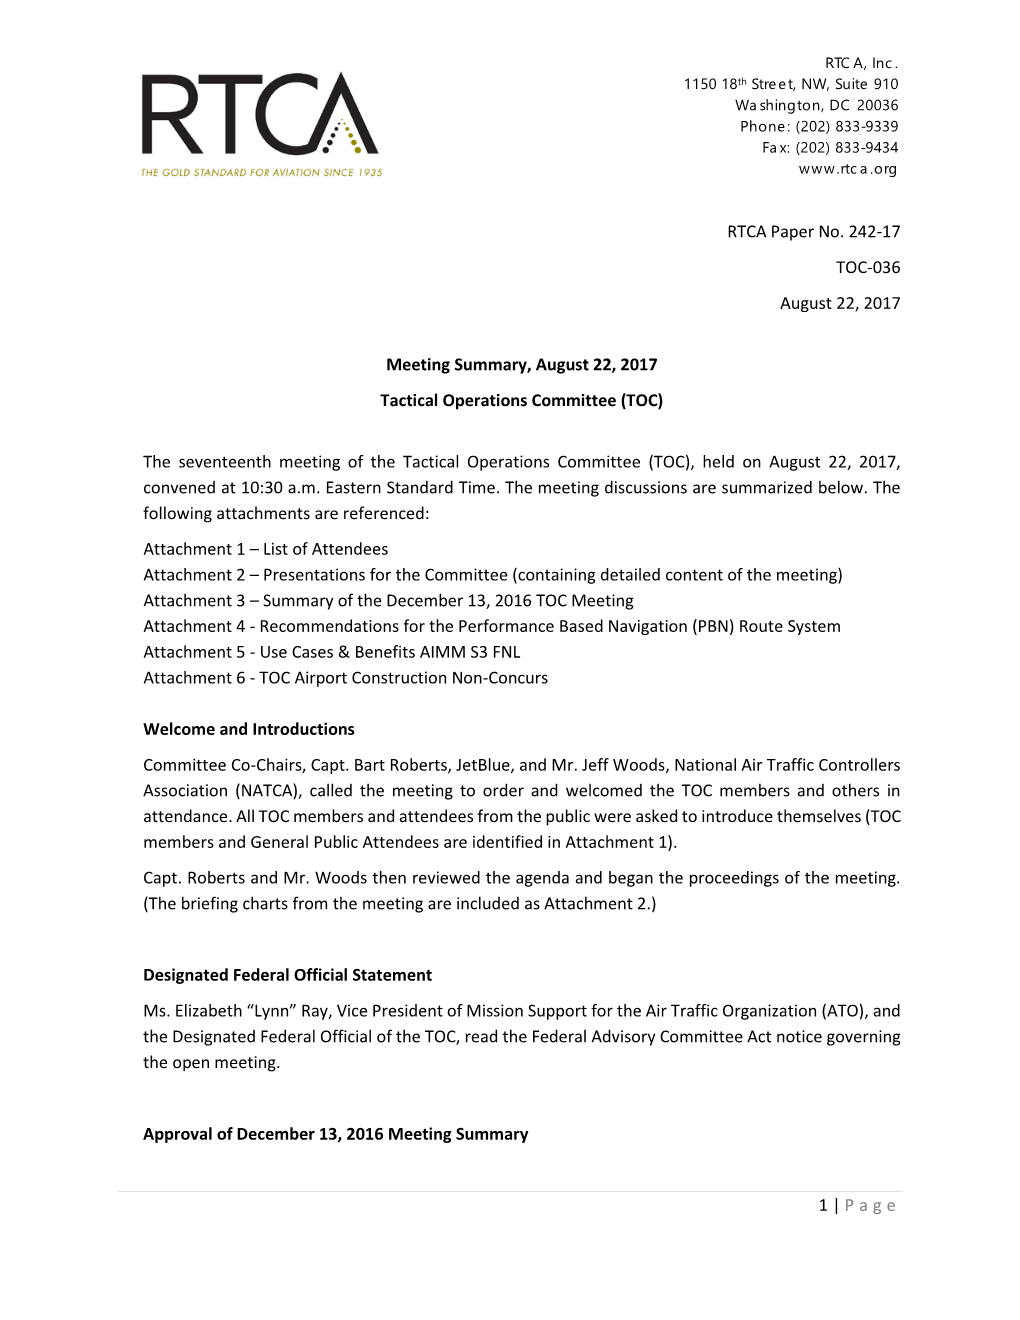 1 | Page RTCA Paper No. 242-17 TOC-036 August 22, 2017 Meeting Summary, August 22, 2017 Tactical Operations Committee (TOC)